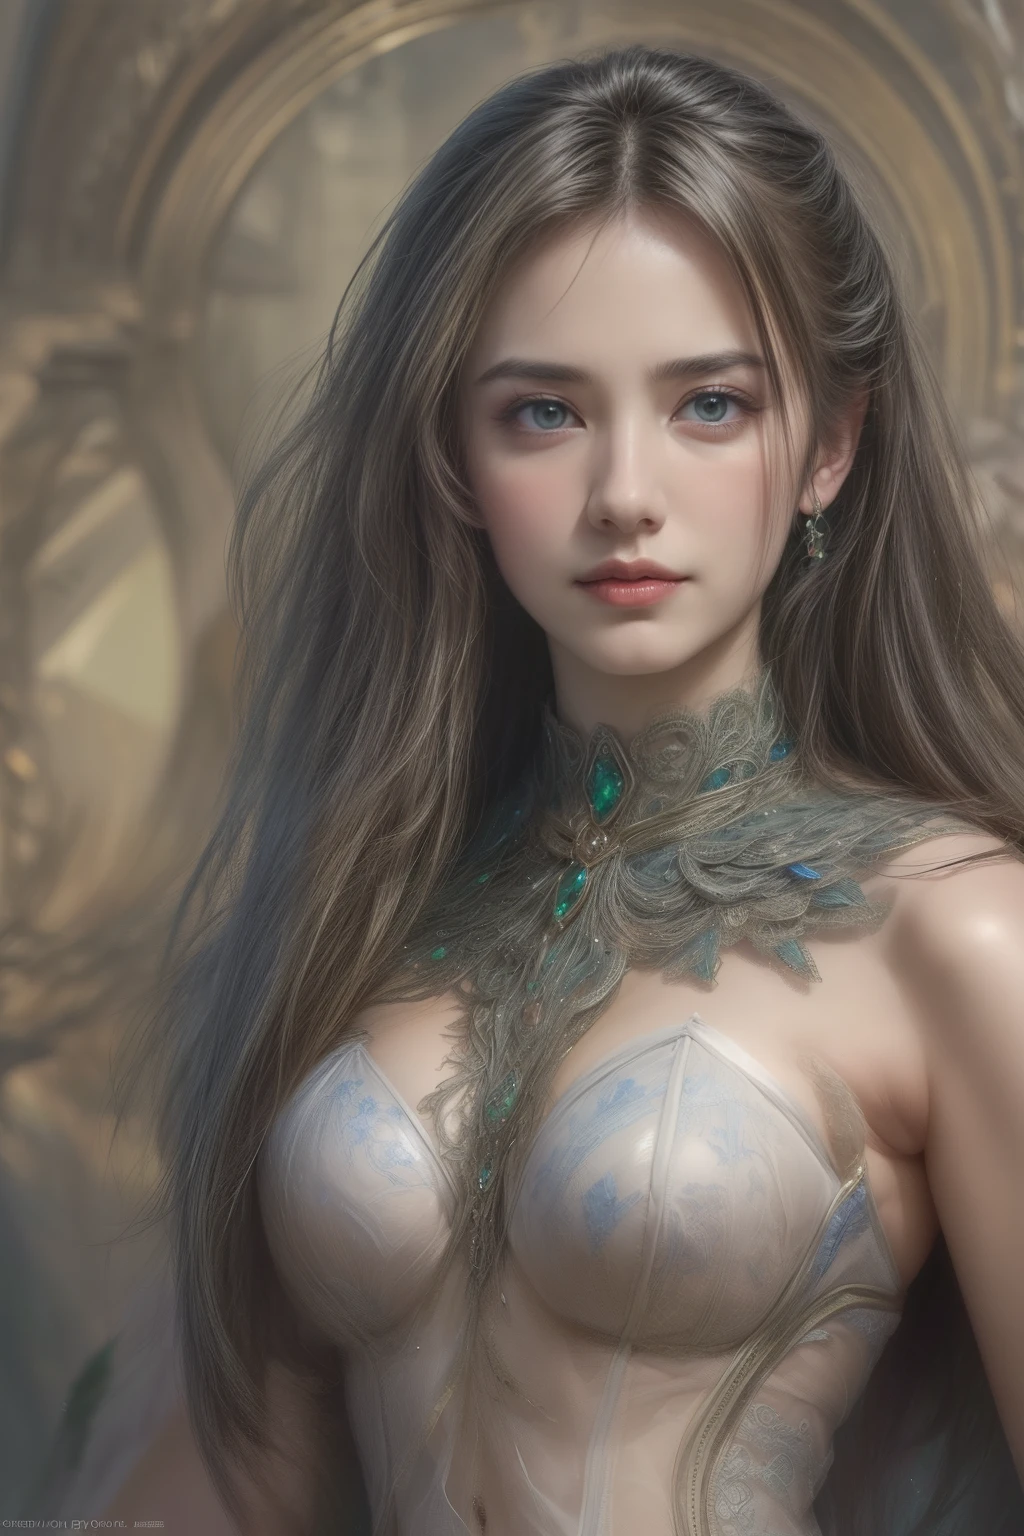 1girl in, age19, Solo, Long hair, Colossal , Looking at Viewer, blonde hair, Bare shoulders, Brown eyes, jewellery, Full body, a necklace, off shoulders, Sweaters, Realistic, A sexy, no makeup and in the green dress, (photograph:1.2)、(photorealistic:1.3)、(masterpiece:1.3)、(Highest image quality:1.4)、ultra high resolution、realistic eyes、 (detailed eyes)、(detailed facial features)、(Detailed garment features)、8K resolution、solo focus、26 year old cute woman、small face、 ,From Side, Photorealistic, Official art, Unity 8k wallpapr, 8K Portrait, Best Quality, Very high resolution, (Incredibly beautiful nature background:1.6), One girl, One beautiful teenage italian girl, sixteen years old, Obscene, (Sexy and glamorous:1.1), (A coquettish expression:1.6), (small breasts with raised pink areolas,:1.6), Vulgarity, (seductively smiling:1.2), (full body1.0), (erotic posing:1.5), (Magic Attack Pose:1.6),(magical effects like sparkles or energy:1.5), (Electric shock from hands:1.1), (Detailed blue bodysuit with beautiful fractal or marble design:1.5), (Beautiful and d delicate ruby, topaz, emerald and sapphire jewelry:1.45),  Beautiful seductive face, Portrait, (Thick eyebrows:1.2), (Big purple eyes:1.2), Beautiful eyes with fine symmetry, (Ultra detailed eyes:1.4), (High resolution eyes:1.1), Intimate face, (ultra detailed skin texture:1.4), White skin, pale skin, Perfect Anatomy, Thin, (Beautiful toned body:1.1), Hair Bow, (Moist skin:1.1), full of sweat, No makeup, dark circles, Good anatomy, Focus Face, goodlooking, (Emilia Clark:0.6)  (Emma watson:0.3),(Jennifer Connelly:0.4), (sensual face:1.5), Elegant face, Nice, Dolce, Cyberpunk Sci-Fi, (Gauntlets with intricate and beautiful designs:1.2), Blurred background, Blurred foreground, depth of fields, (Motion Blur:1.1), Complex and colorful biomechanical bodysuit, Zentangle, mandalas, Entangled,  (Small breasts:1.2), Sheer breast, (Beautiful :1.2), (NSFW:1.2), large hips, drivel,  Juice stain, grabbing on breasts